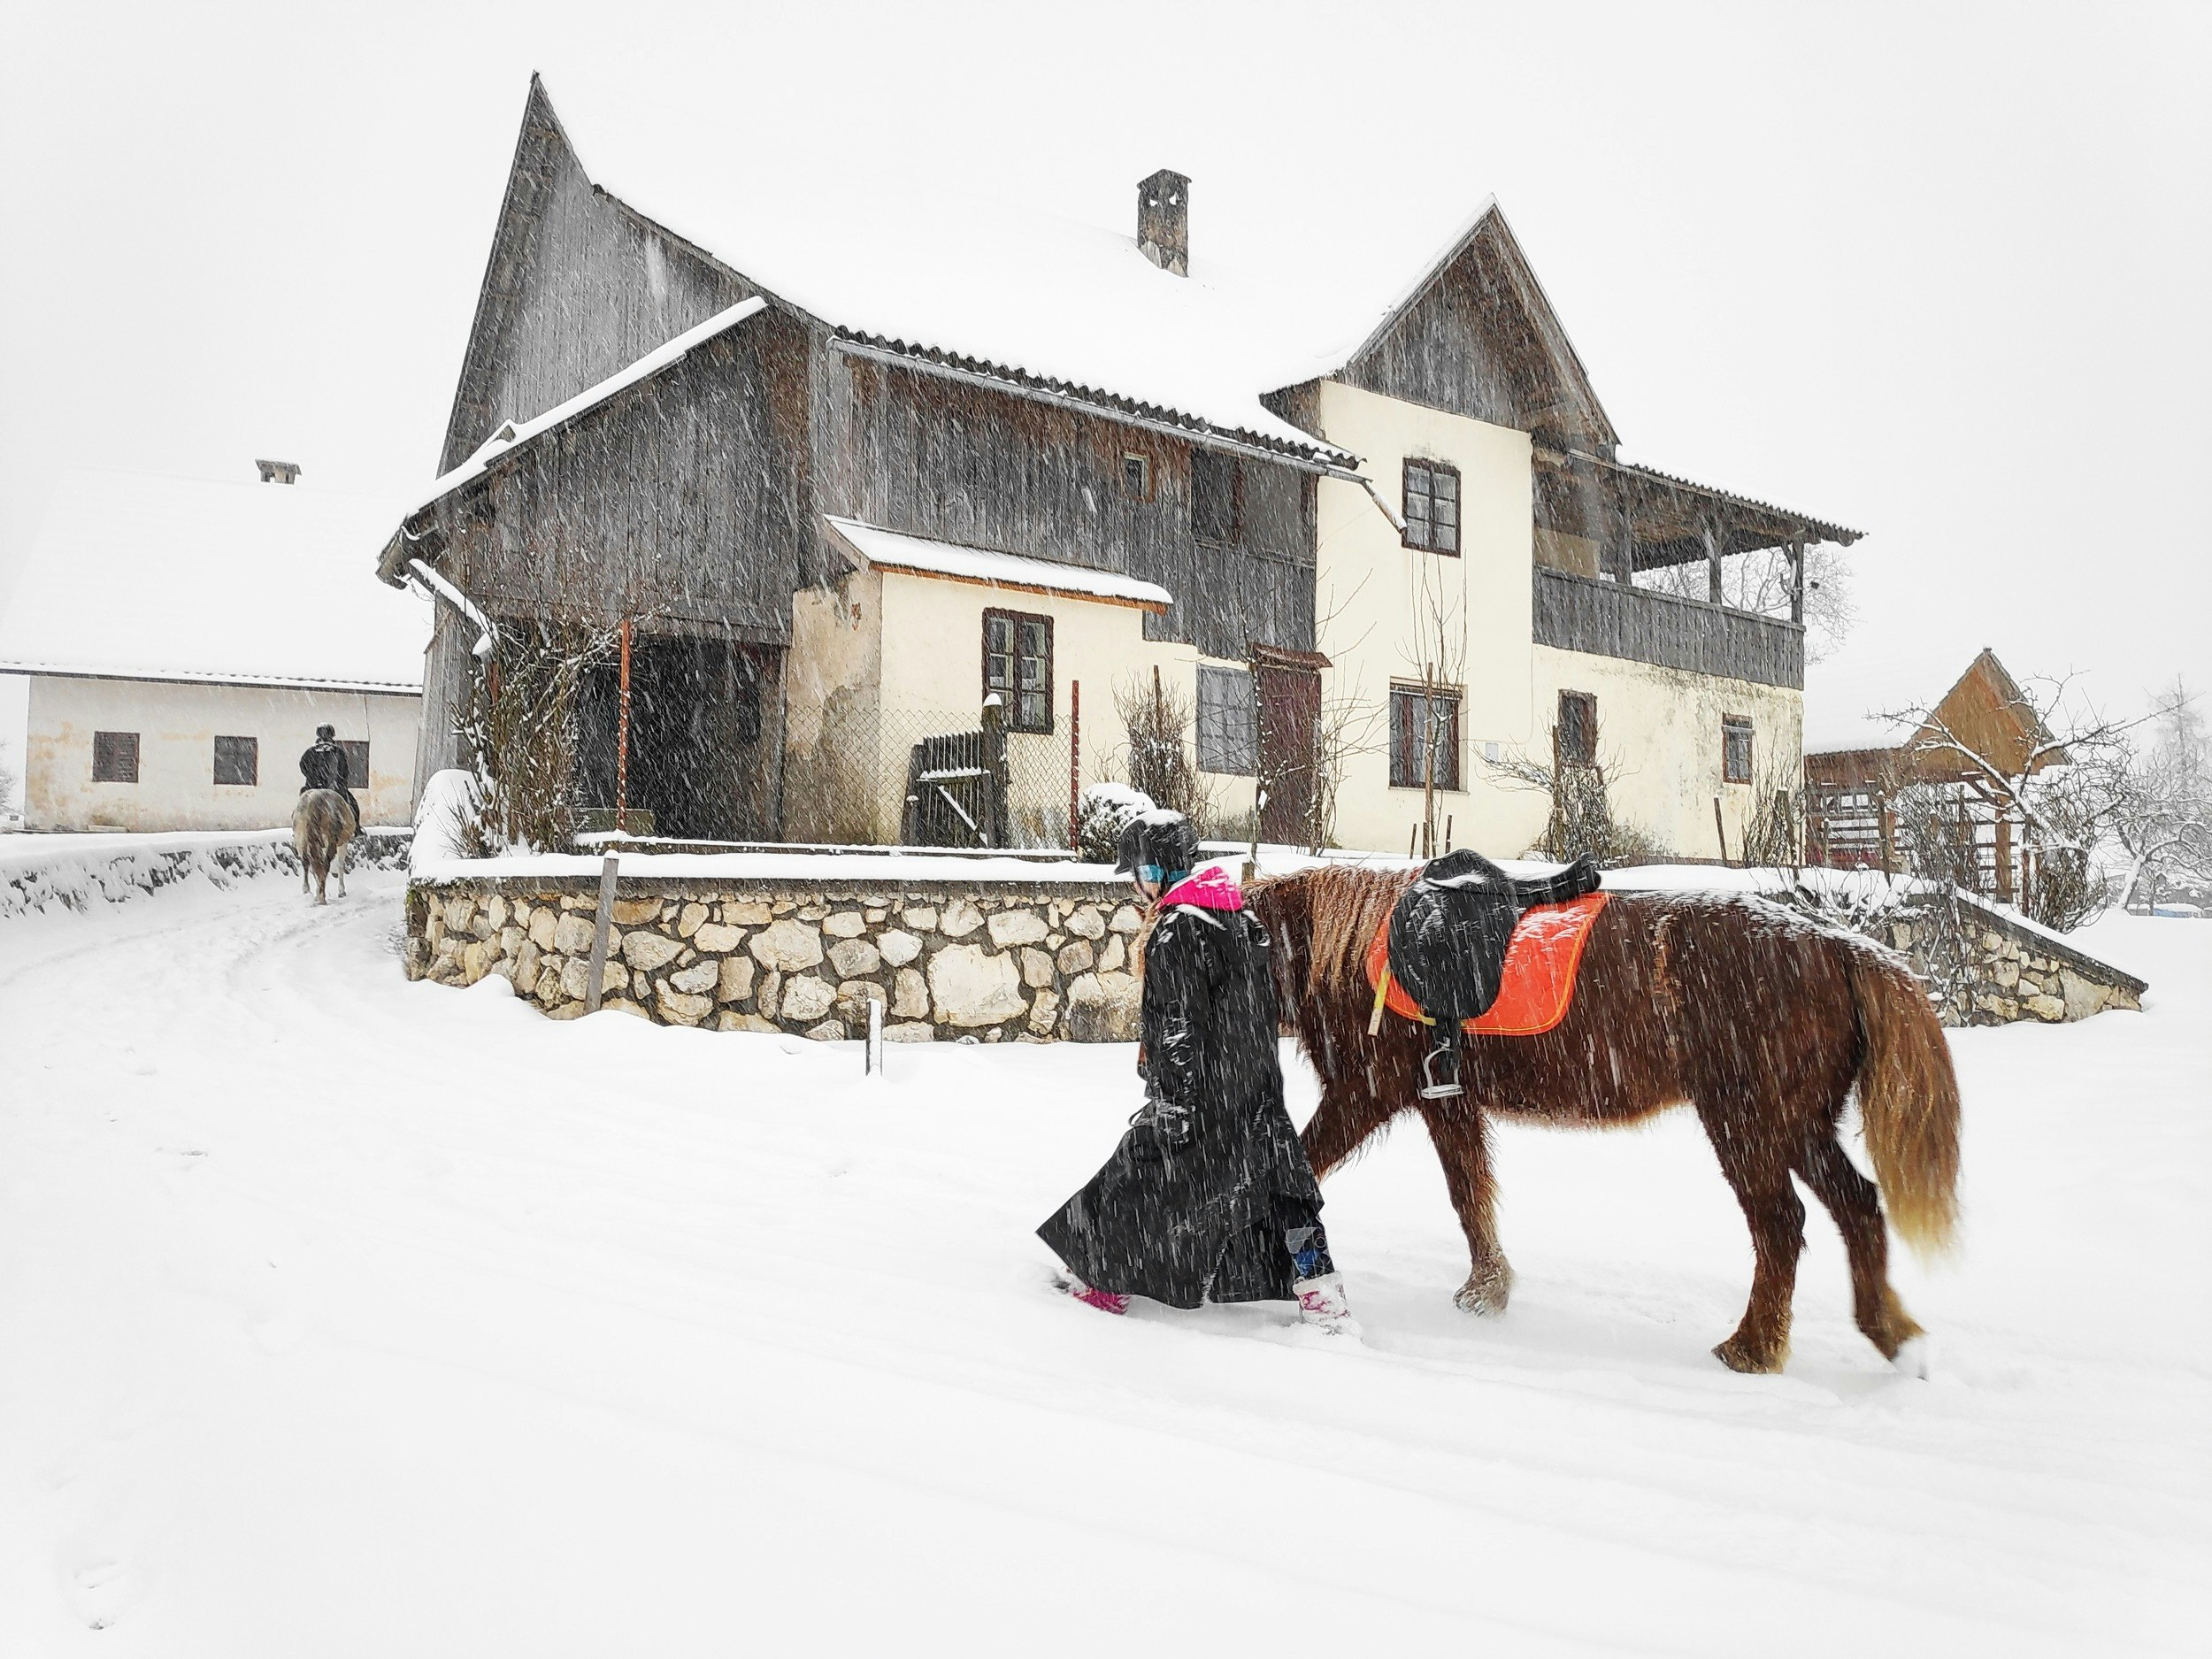 A,Walk,With,A,Horse,In,The,Snow,In,Bohinj